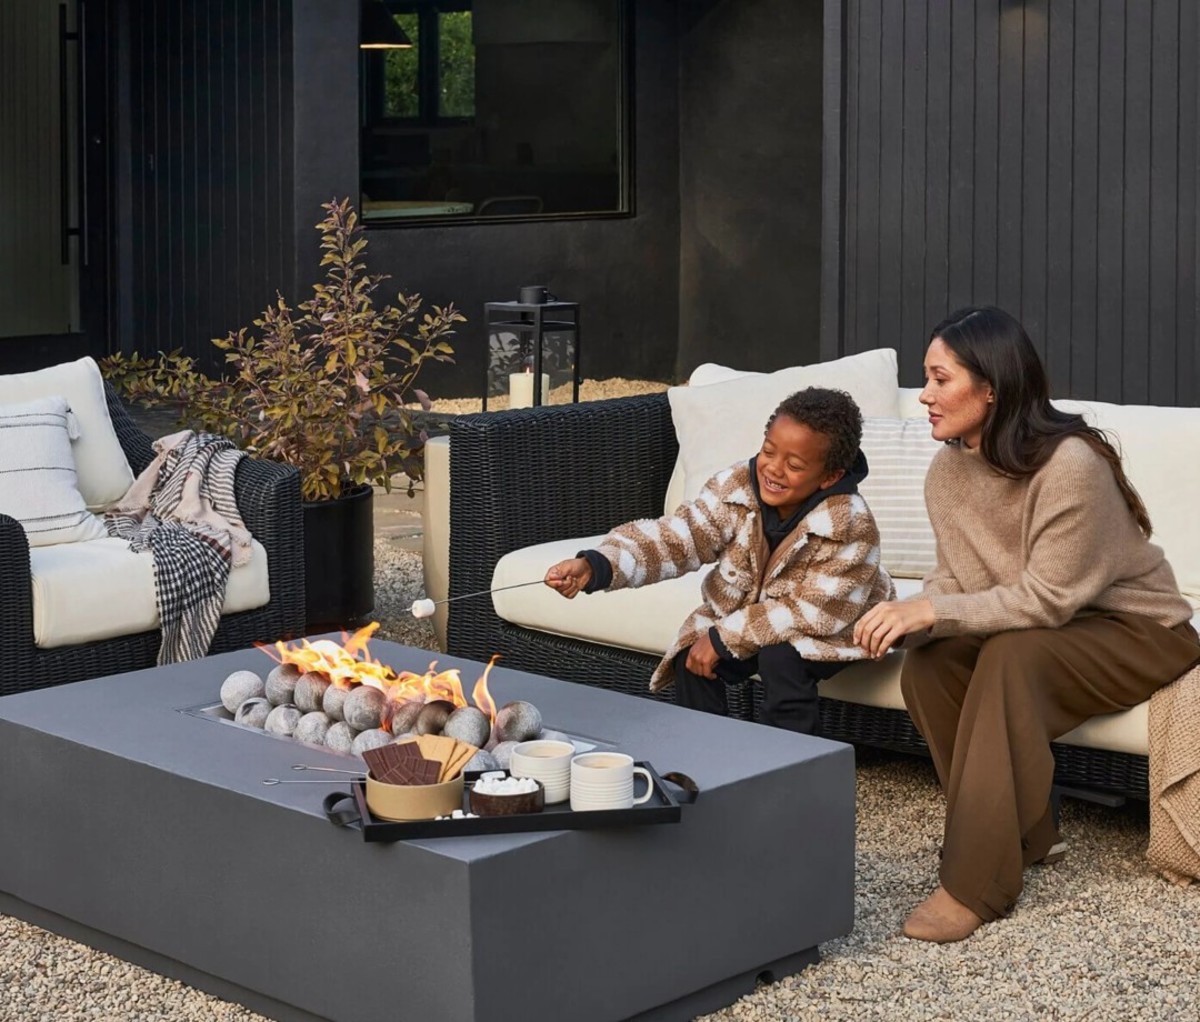 Mother and son sitting on outdoor sofa roasting marshmallow over fire pit